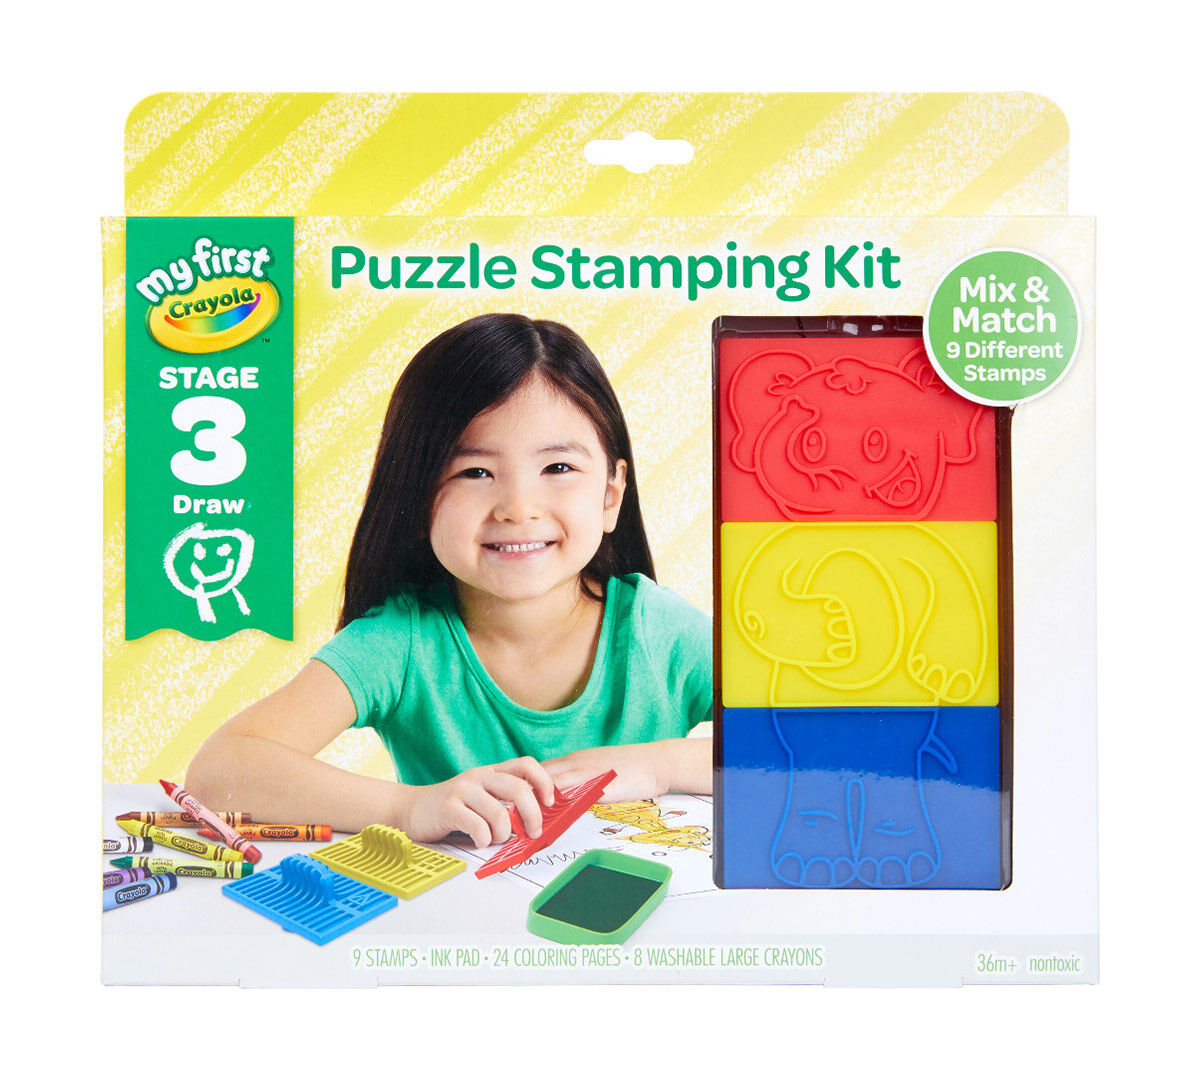 My First Crayola Stage 3 Puzzle Stampers